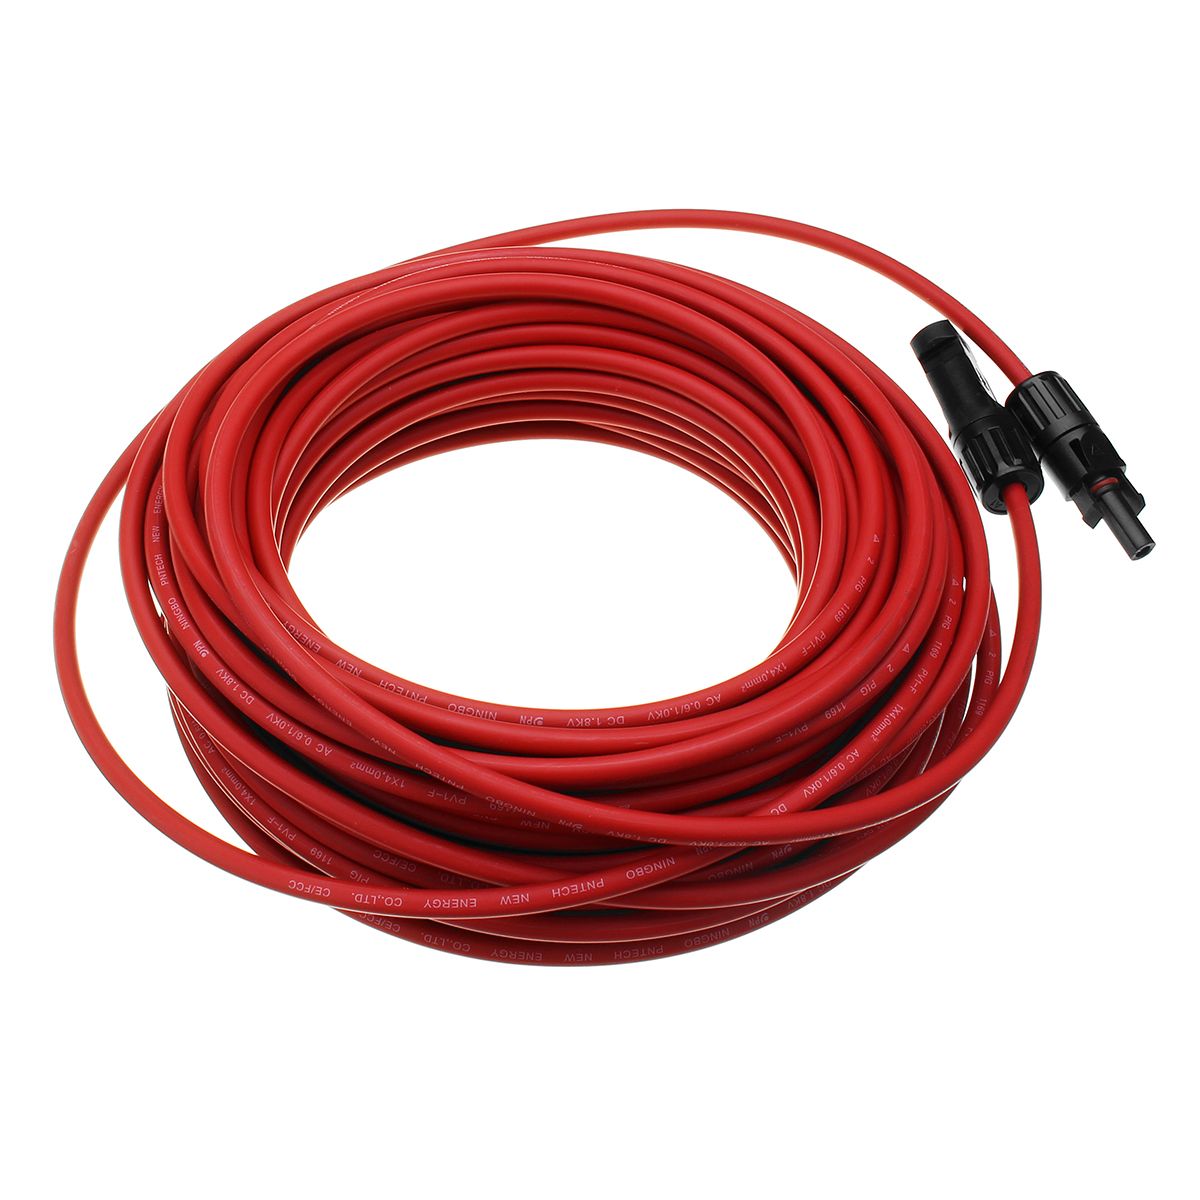 12-AWG-20-Meter-Solar-Panel-Extension-Cable-Wire-BlackRed-with-MC4-Connectors-1338749